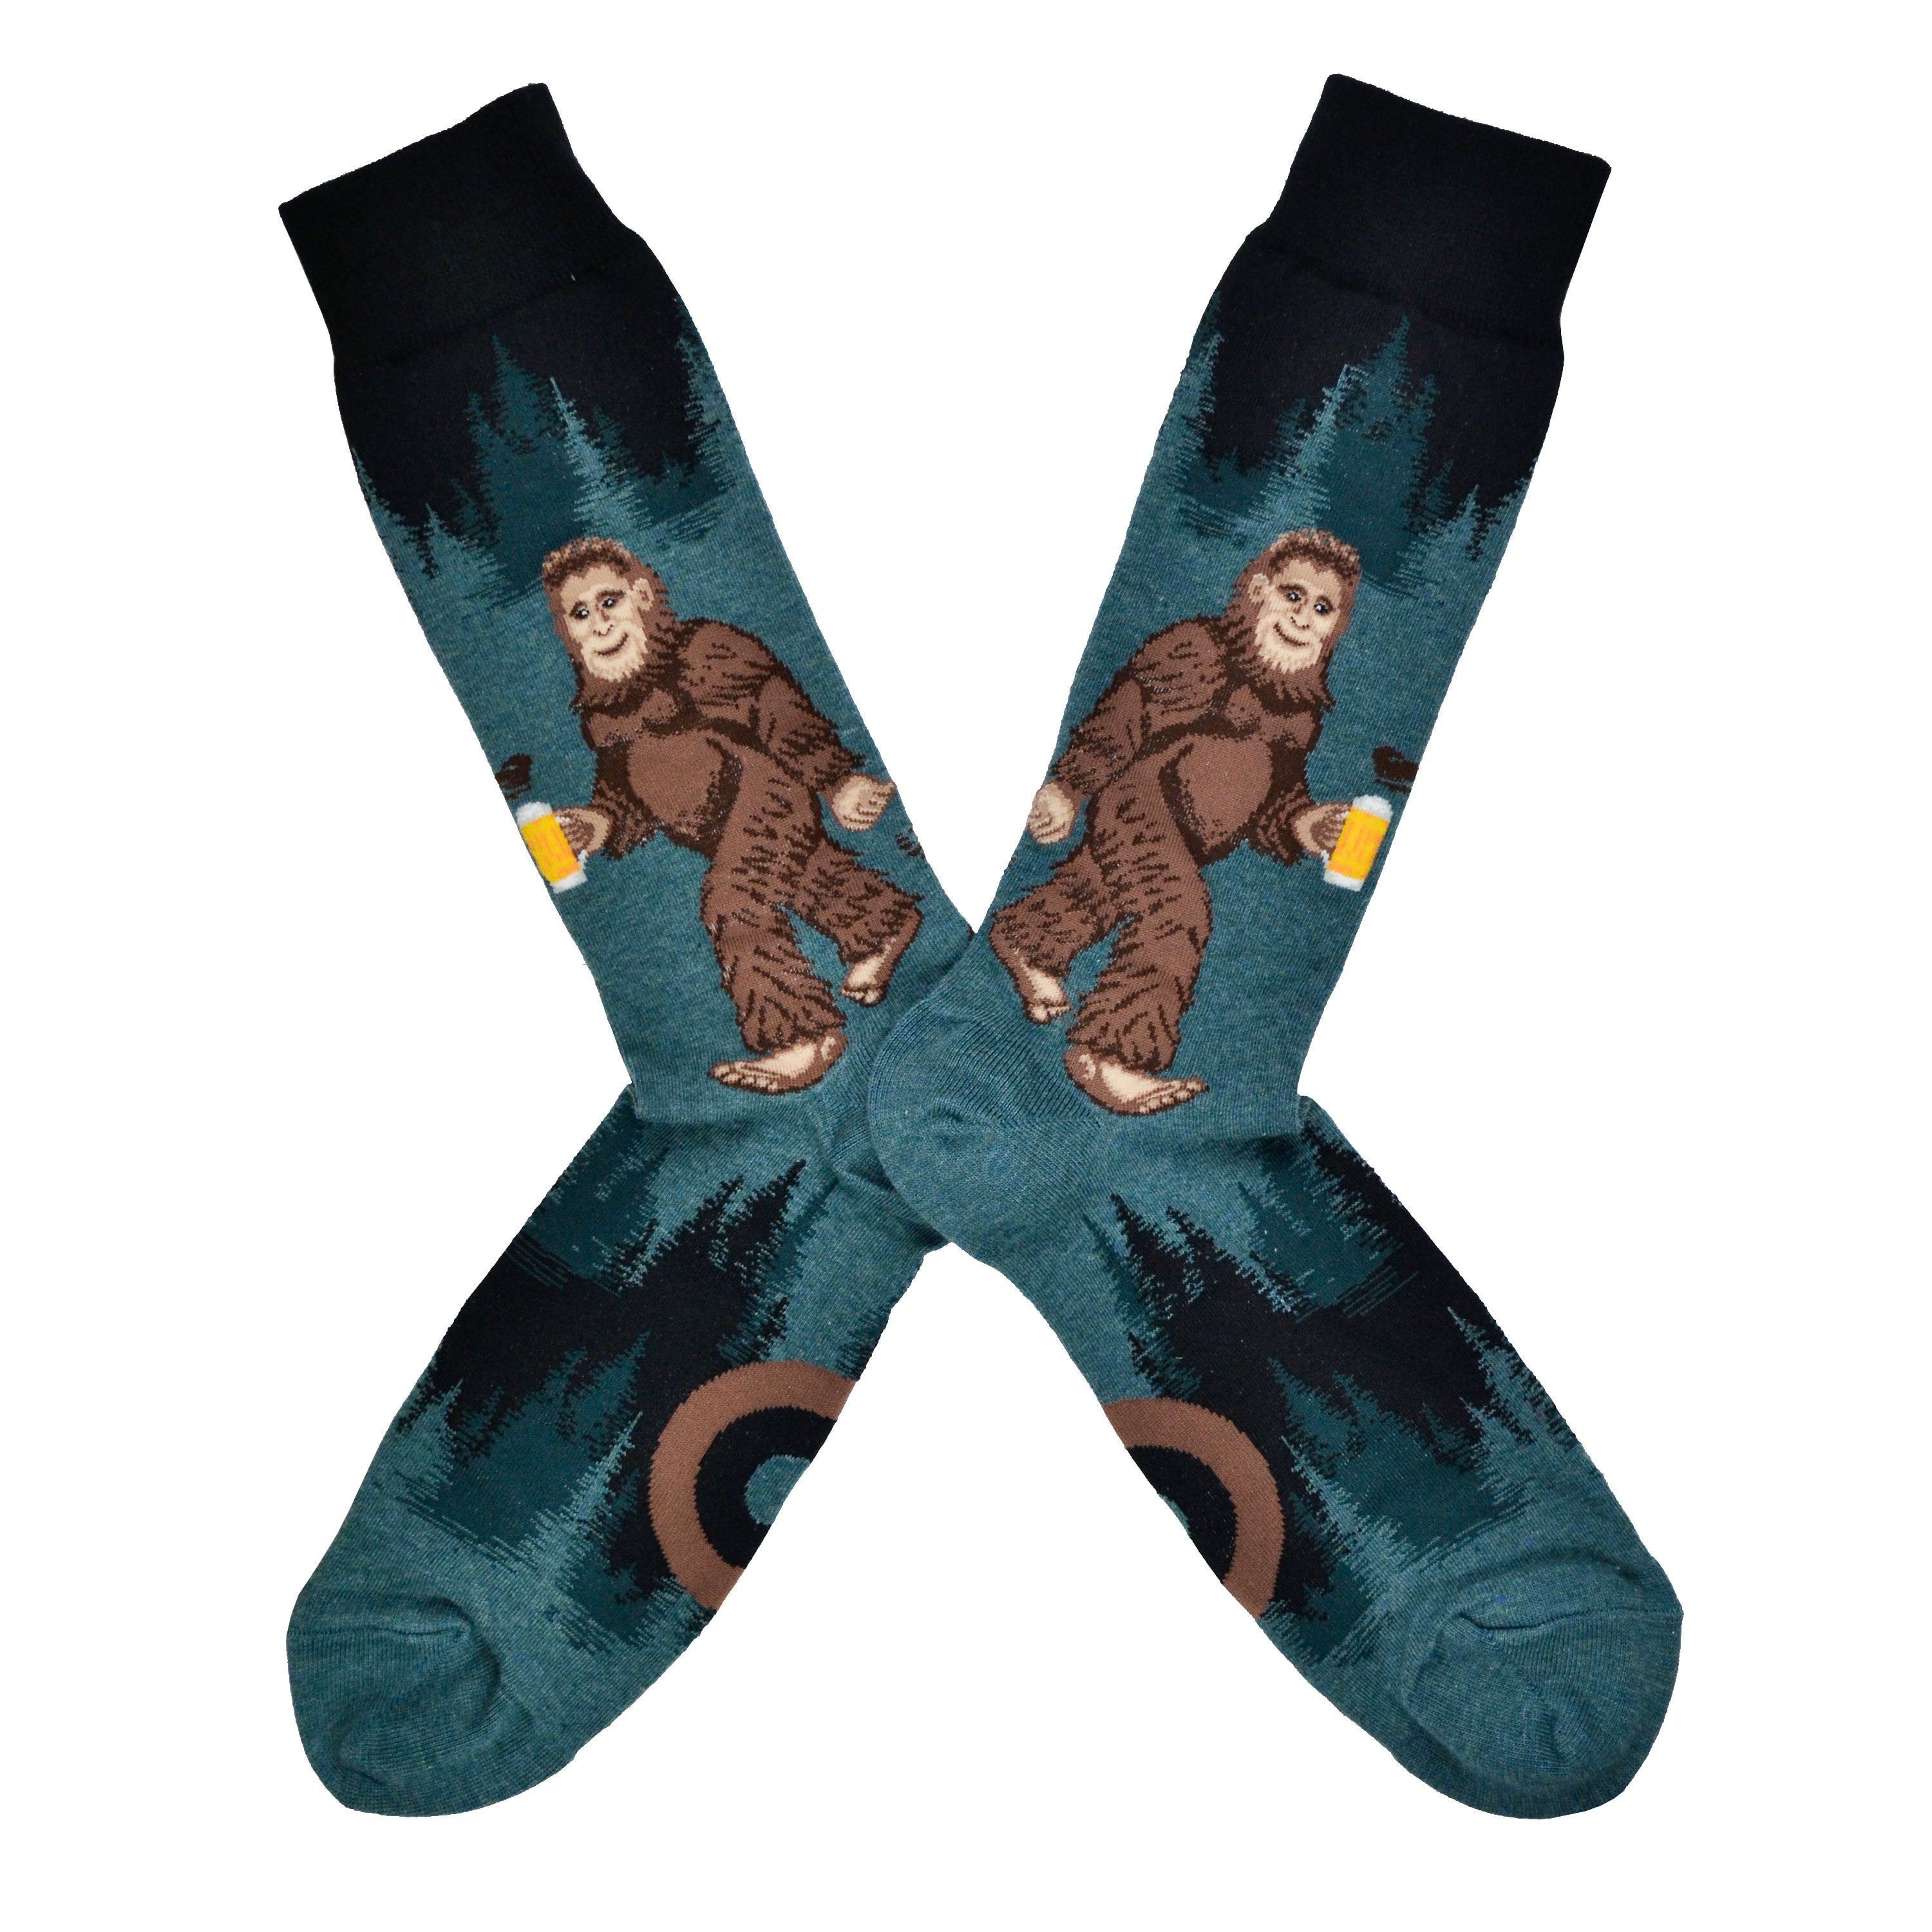 These heathered blue/green and black funny men's cotton crew socks by Mod Socks feature Big Foot walking amongst the trees drinking a beer.